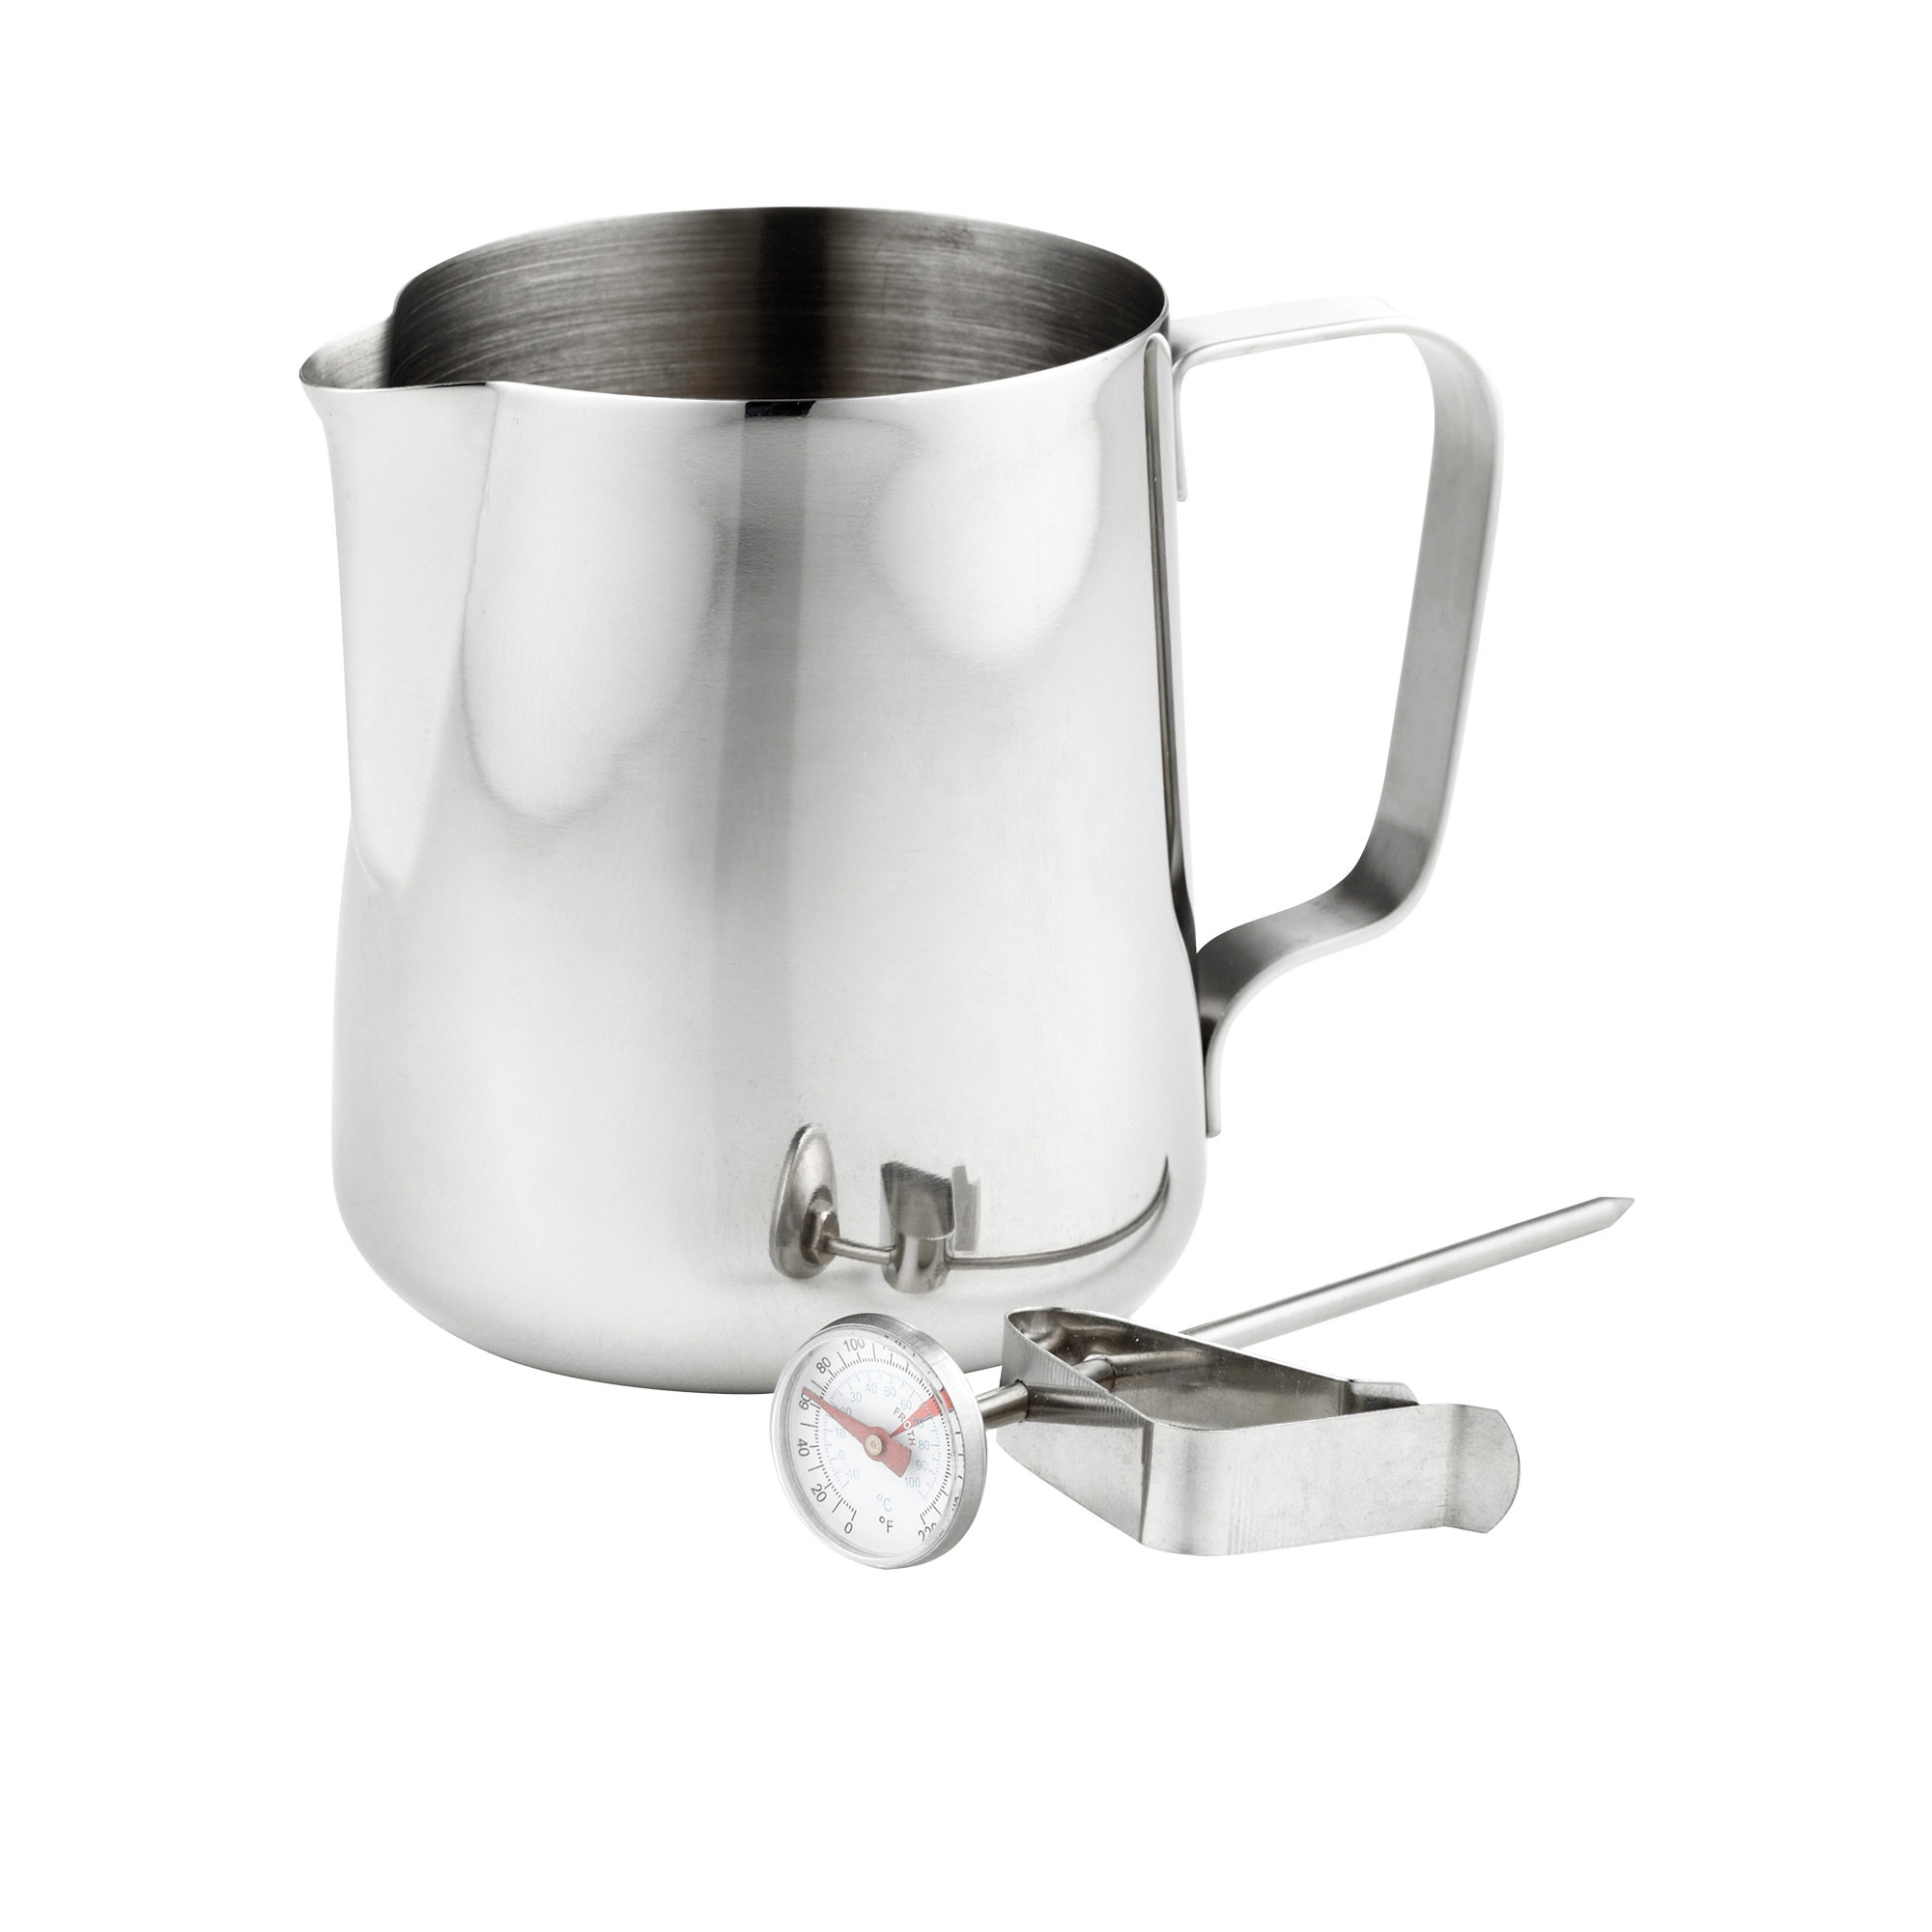 Leaf & Bean Milk Frothing Jug & Thermometer 600ml Image 1